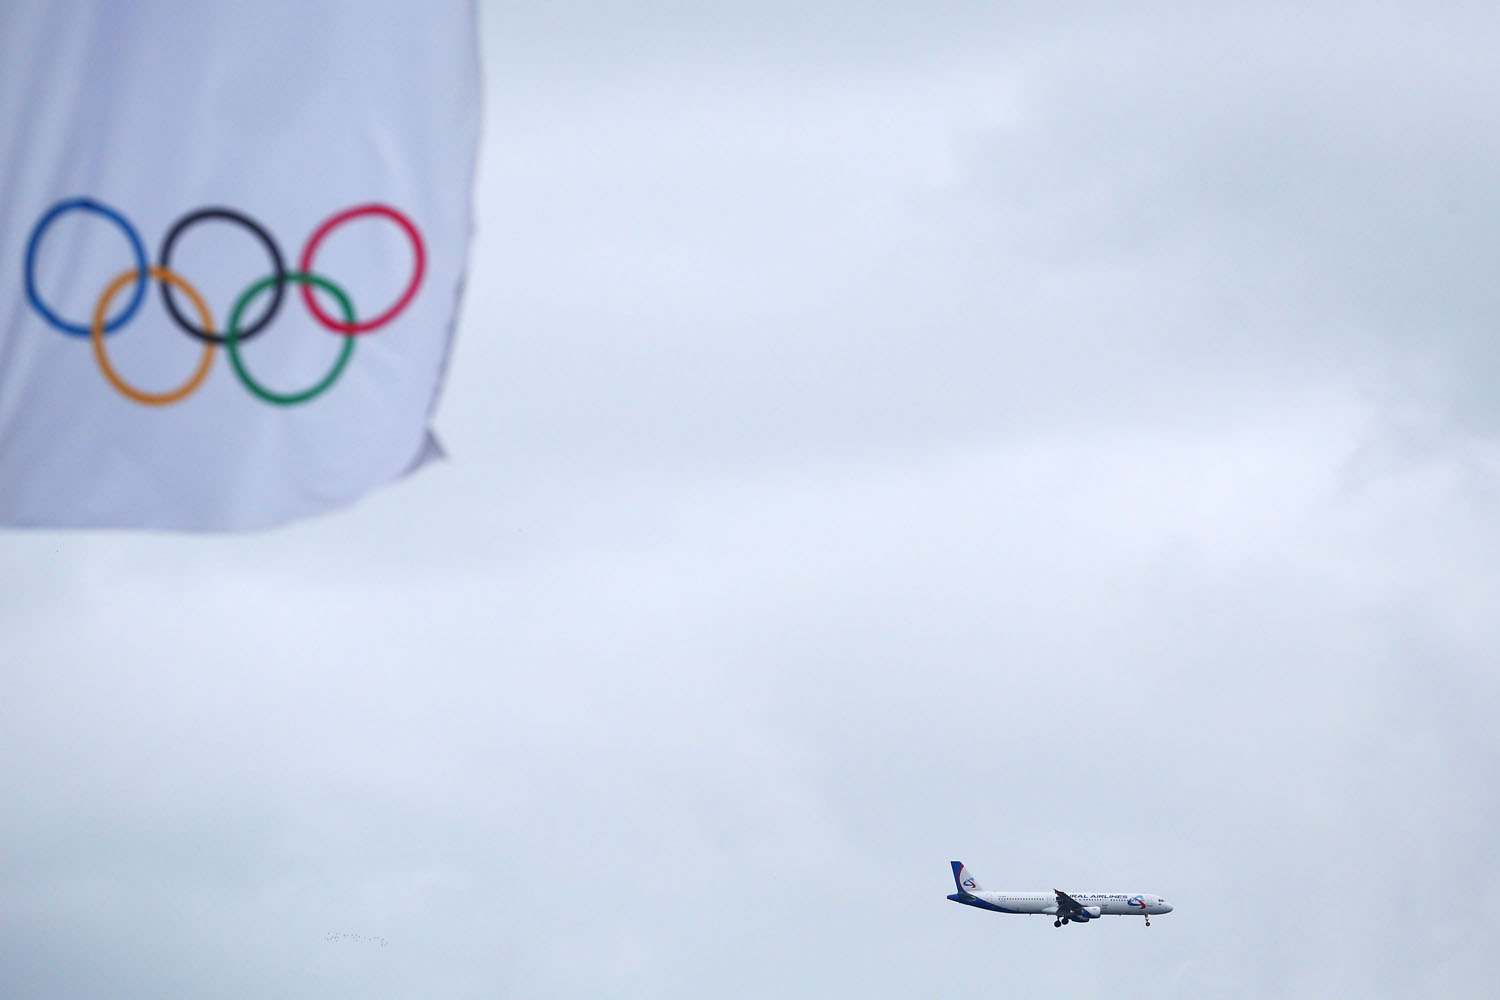 A passenger airliner arrives at Adler Airport ahead of the Sochi Winter Olympics on January 31, 2014.